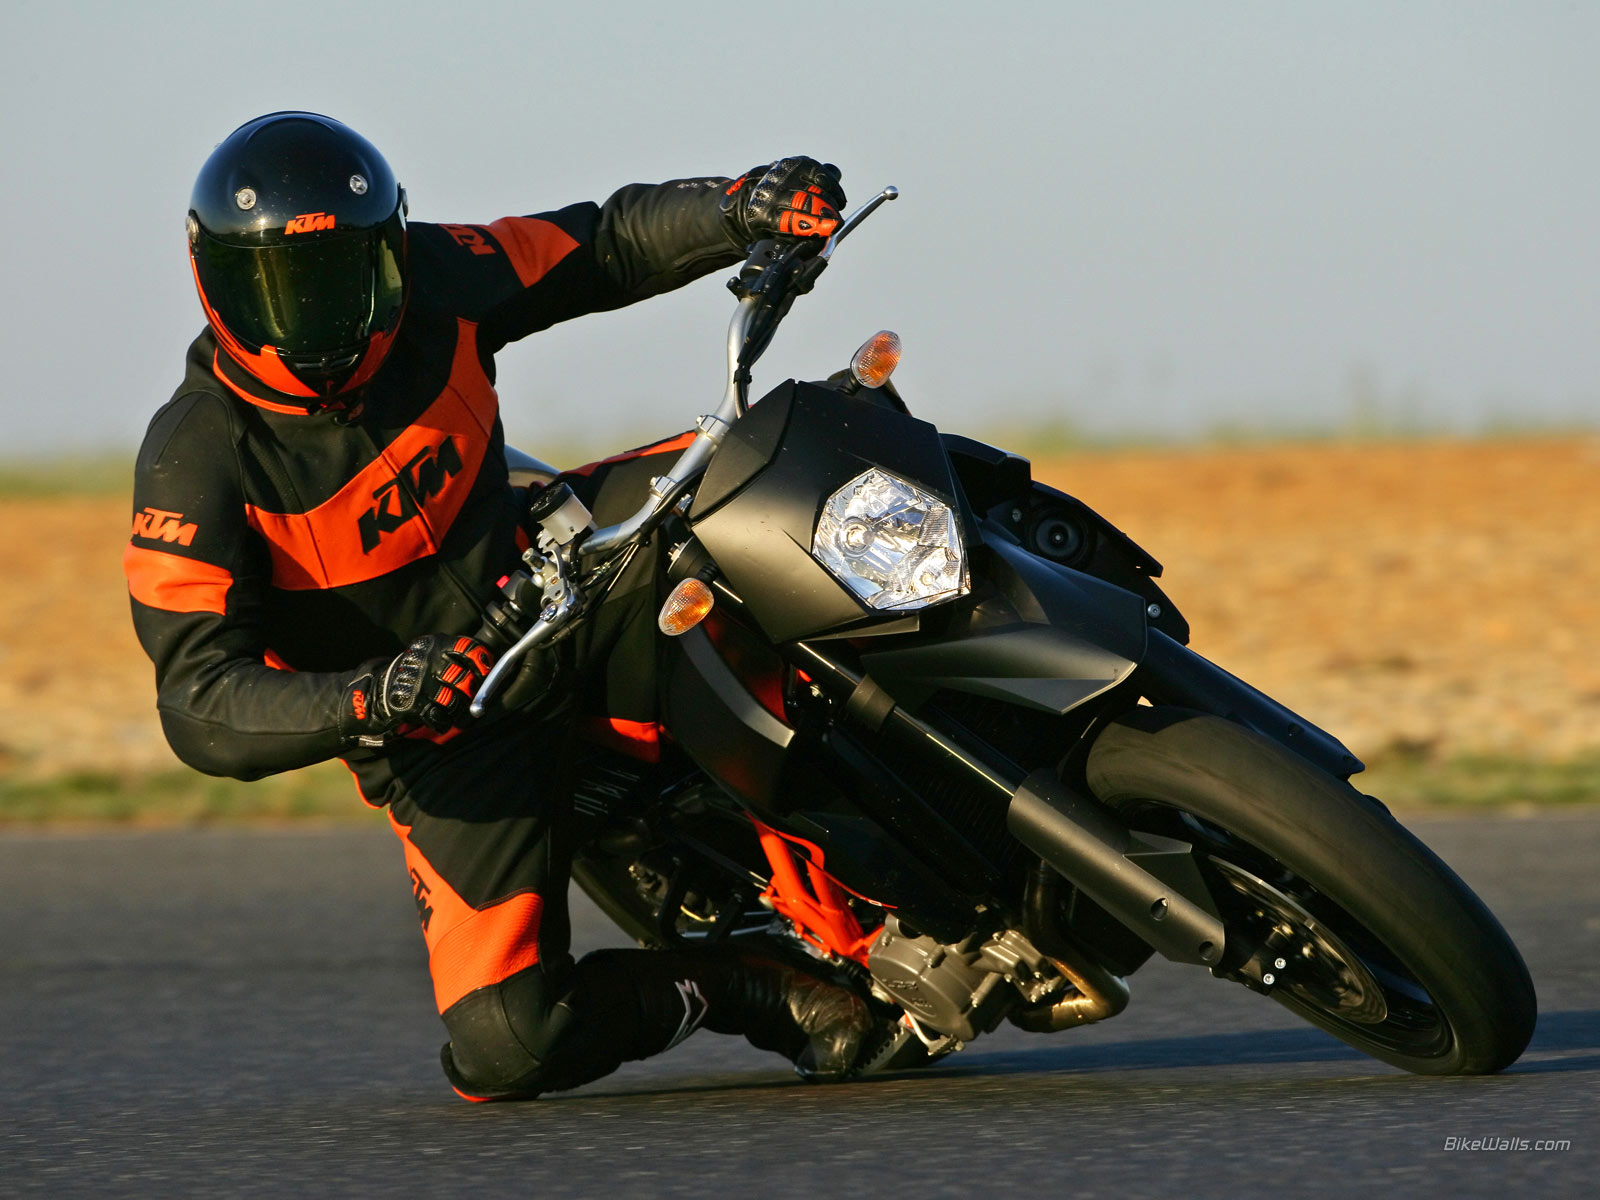 Bike Pics And Wallpapers - Motorcycle Racing , HD Wallpaper & Backgrounds